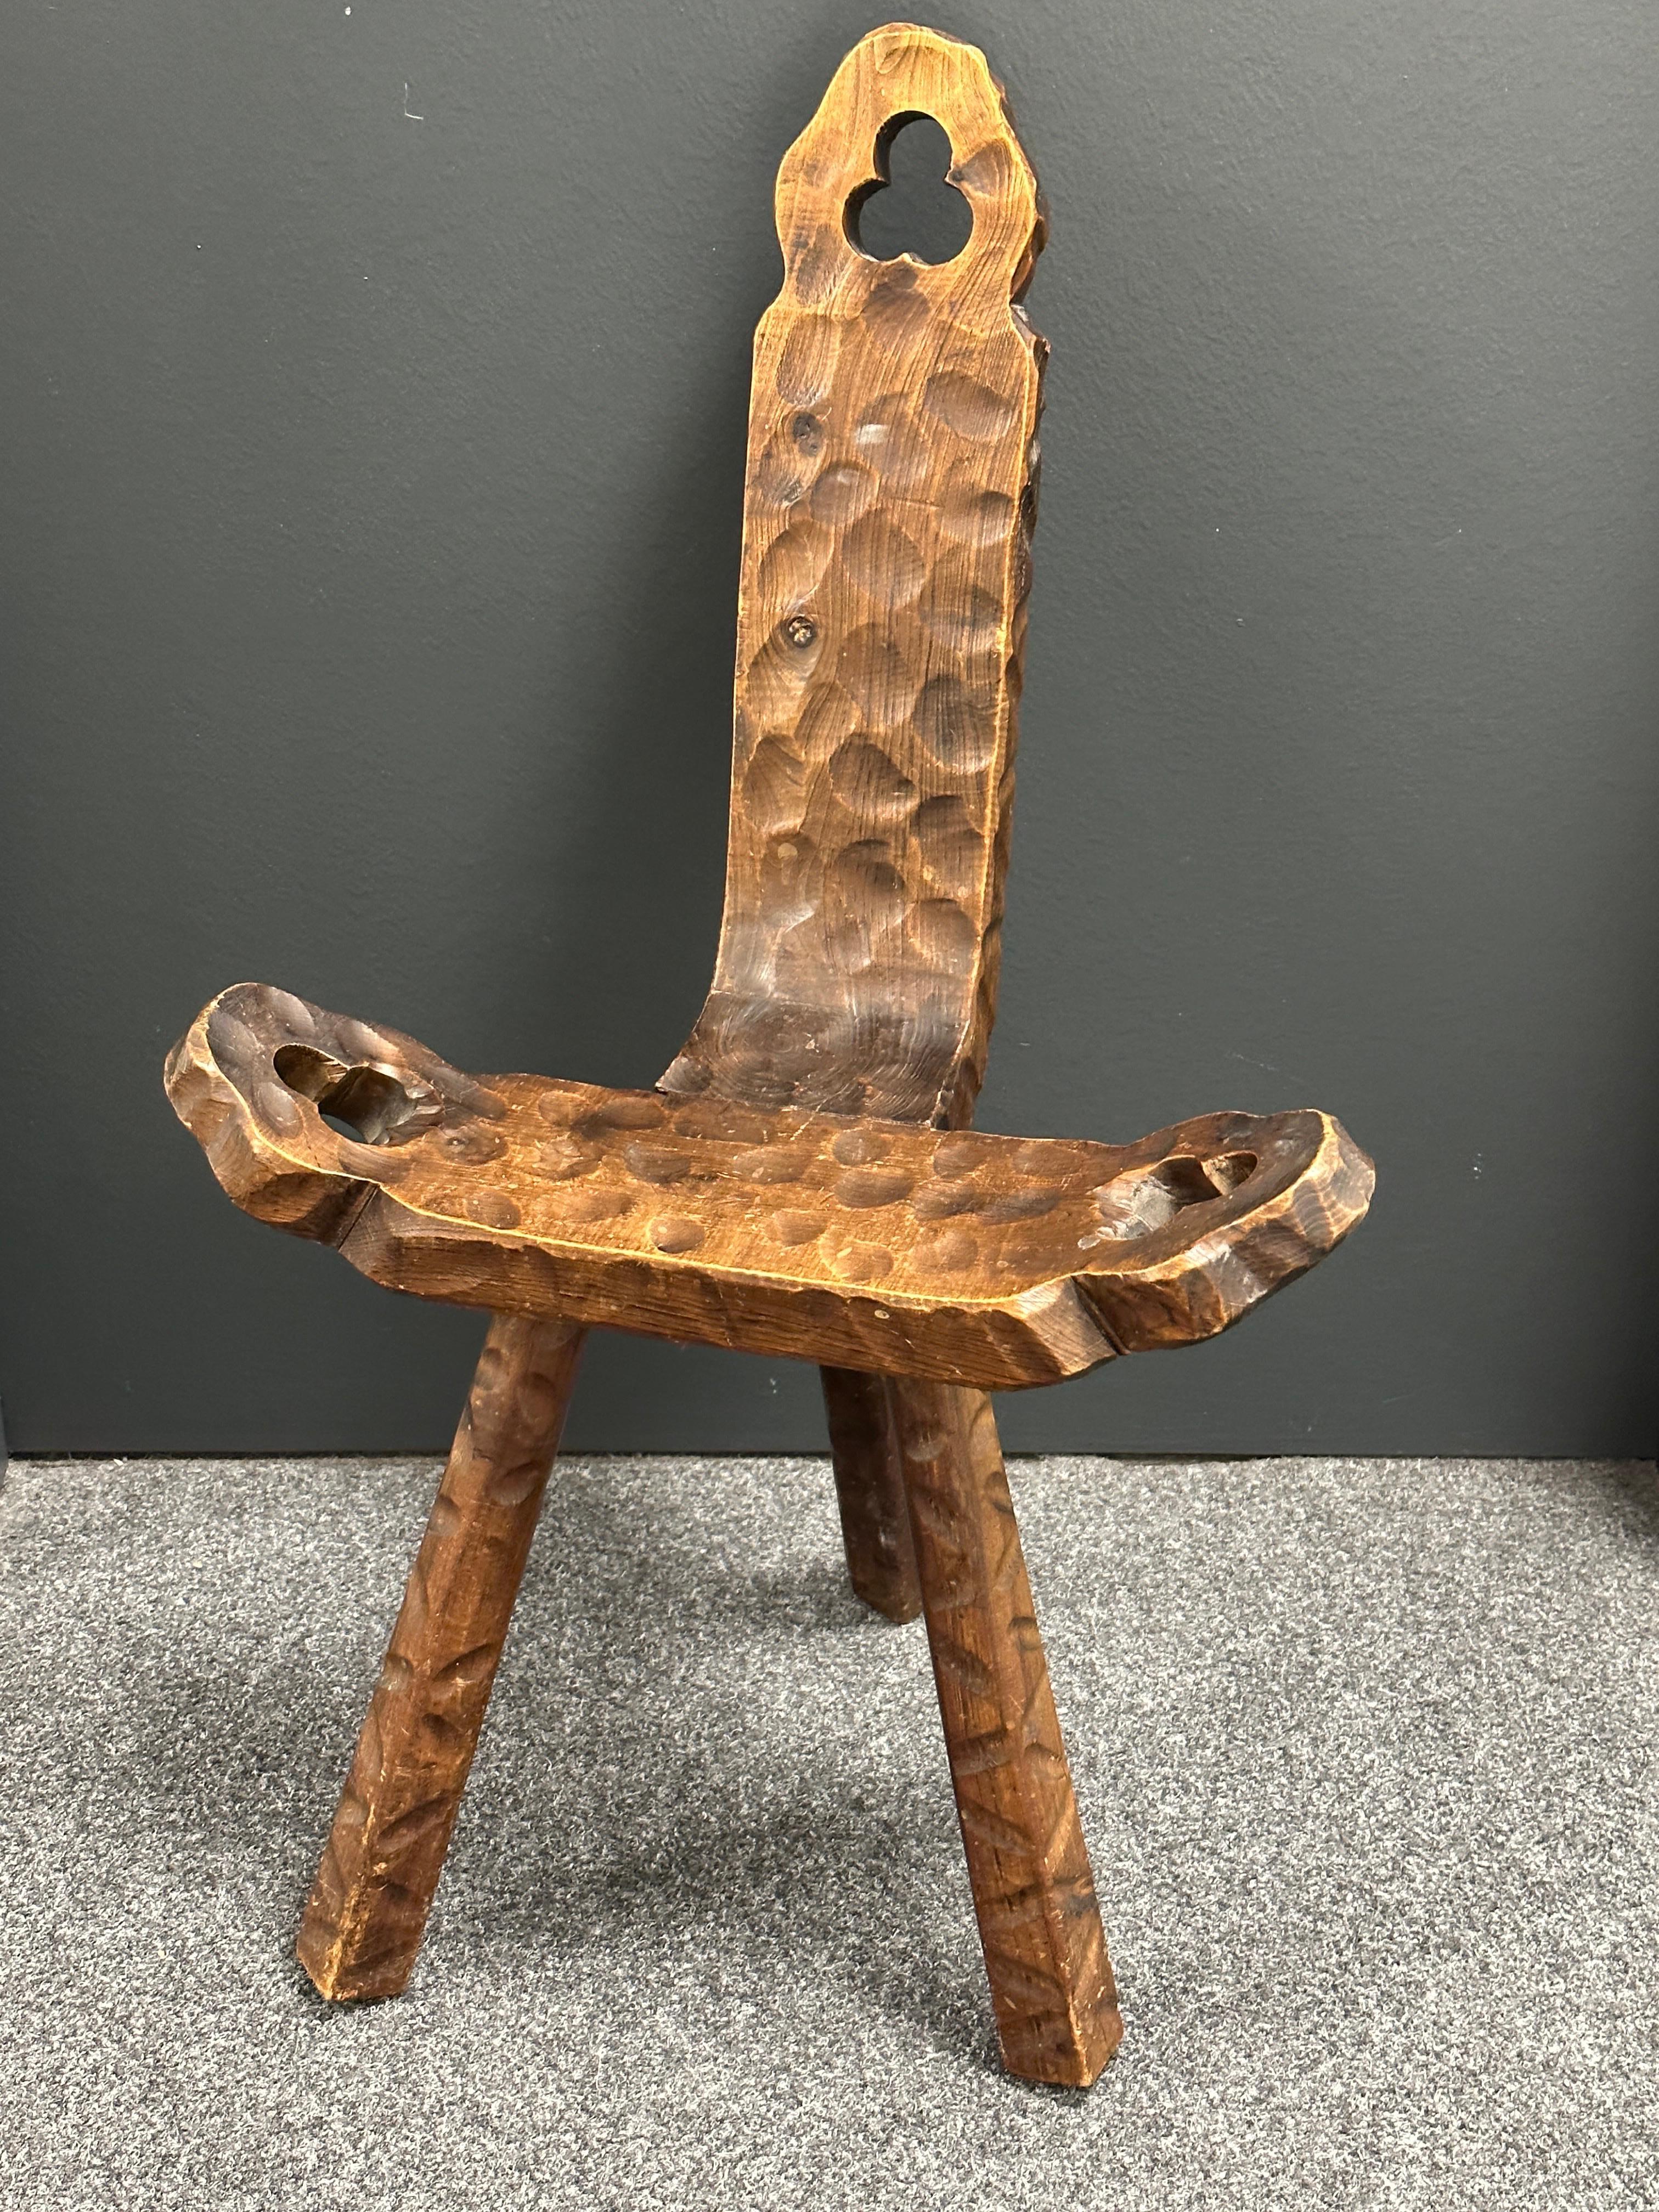 Hand-Crafted Mid-Century Modern Brutalist Sculptural Wood Tripod Chair, Spain Vintage 1970s For Sale